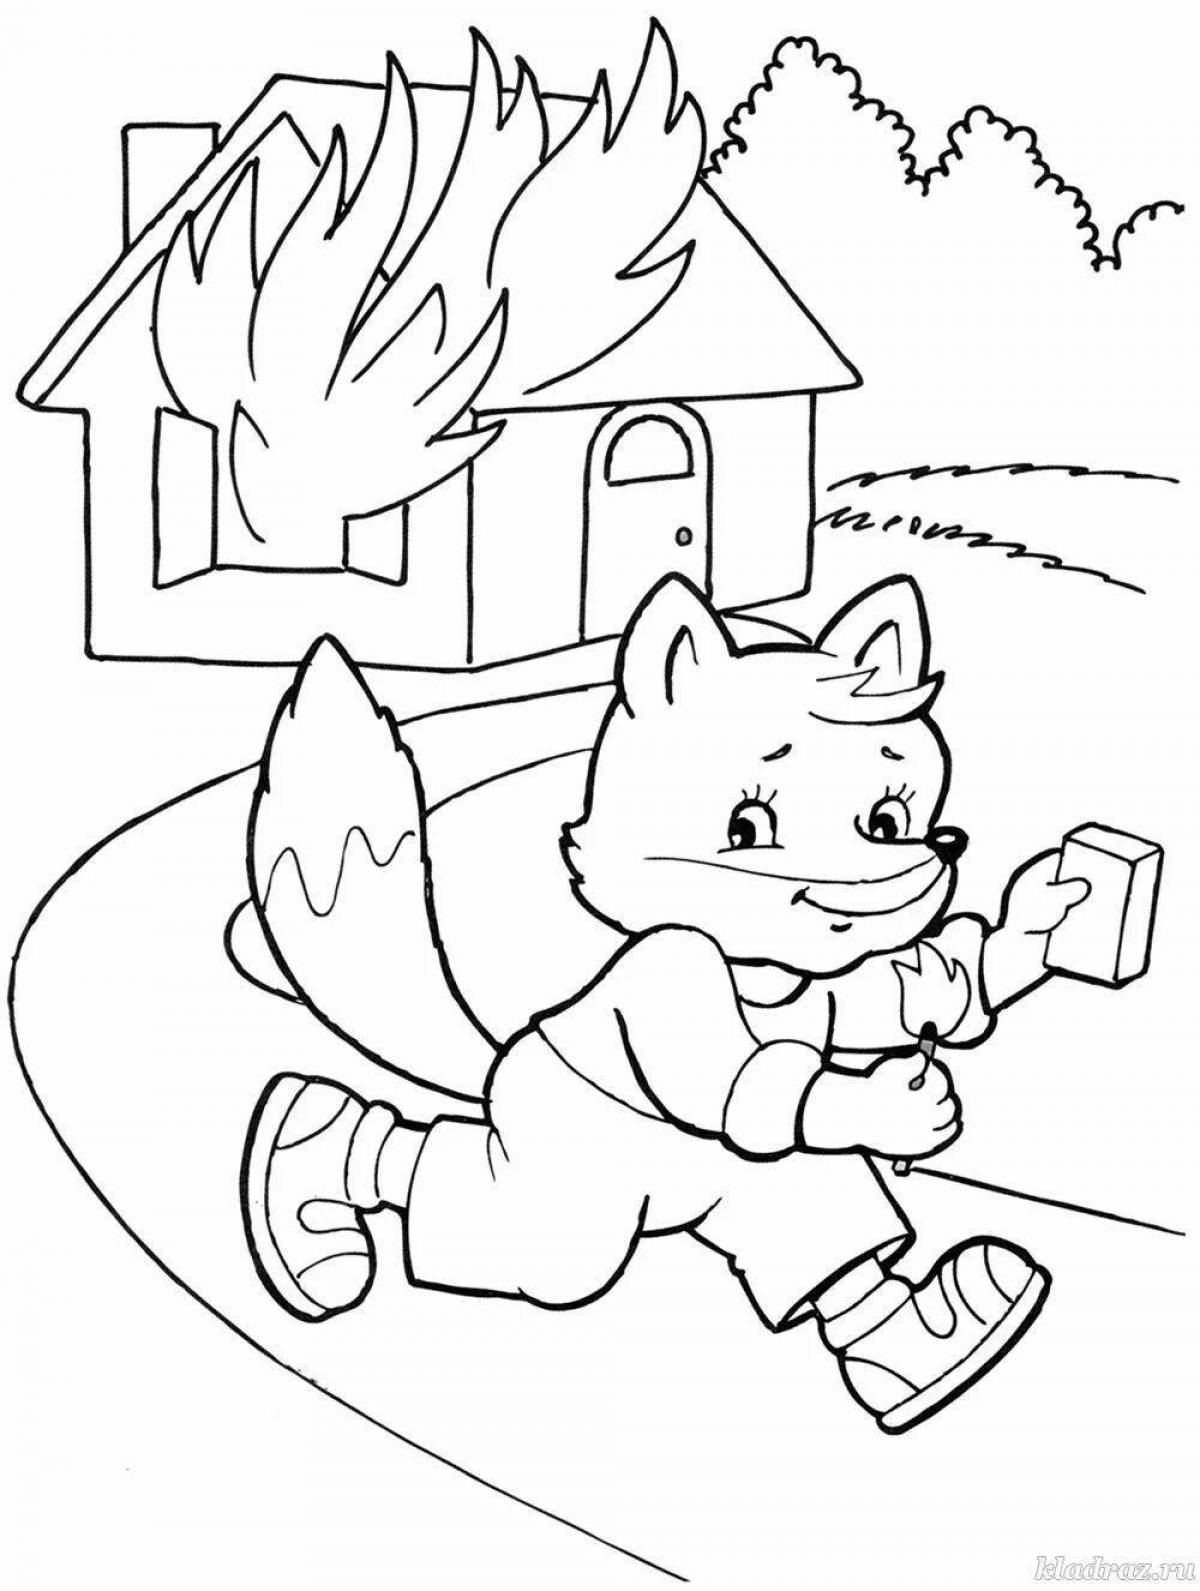 Color-fabulous coloring page by obzh